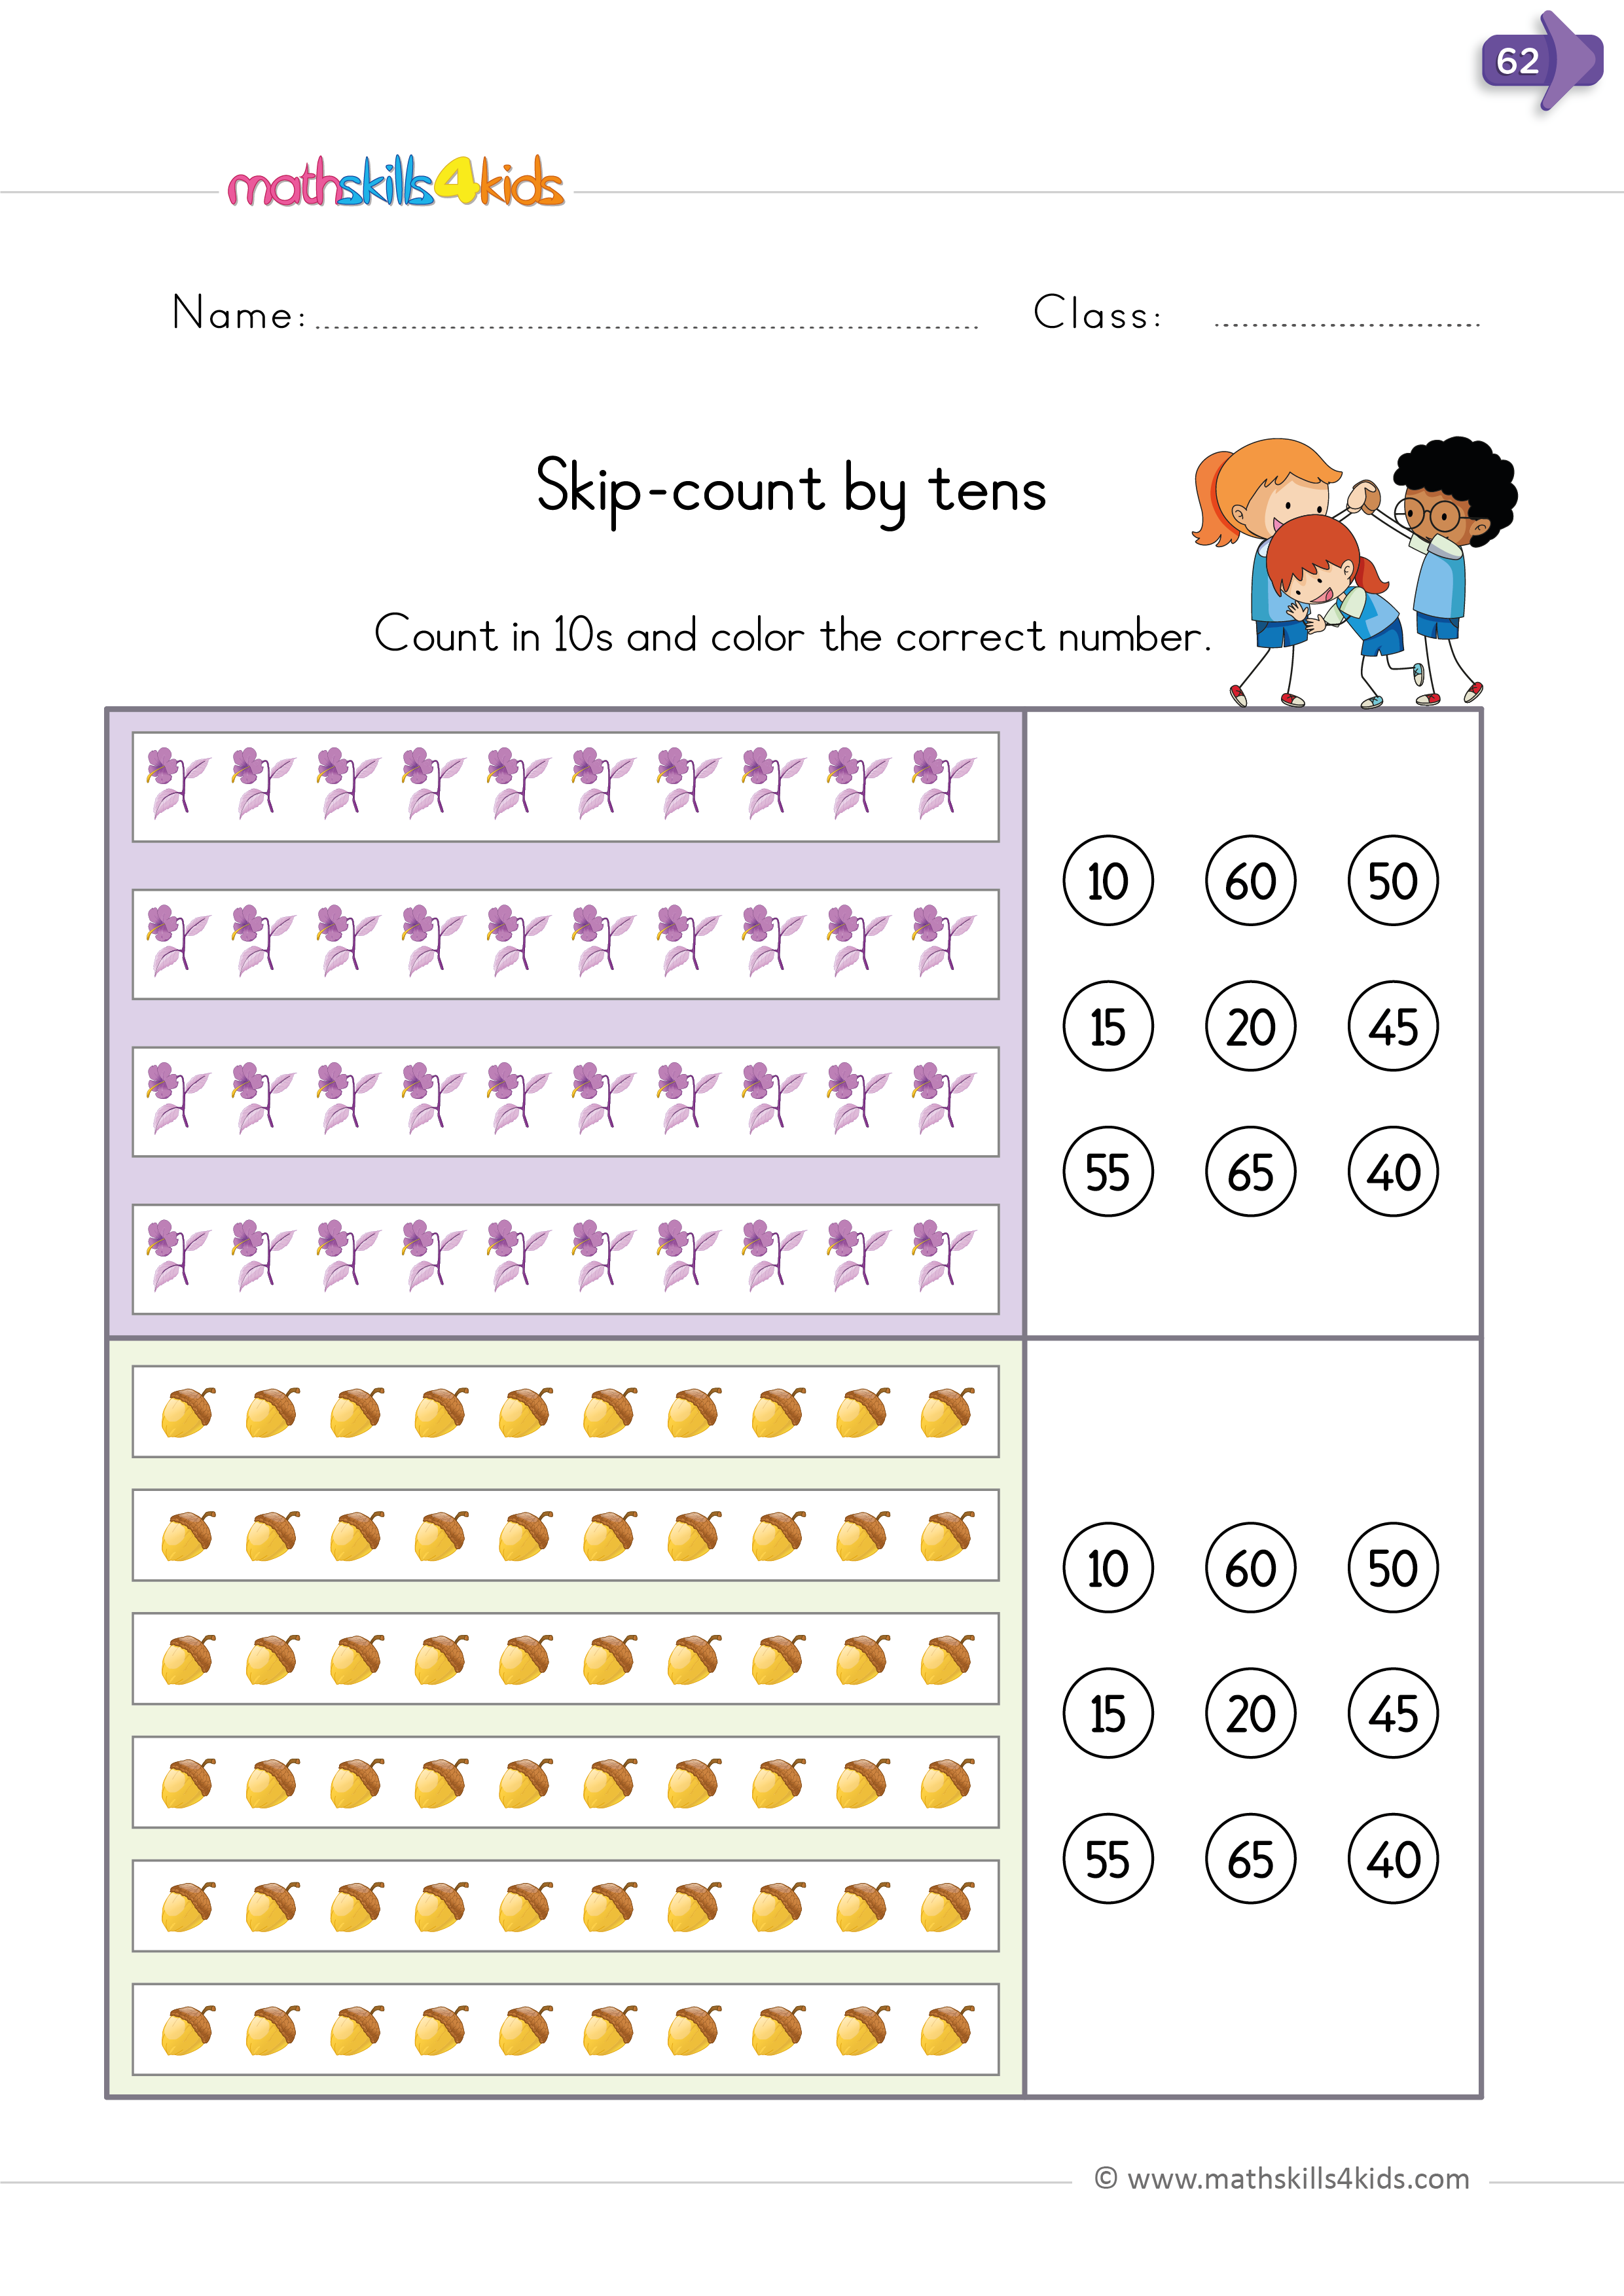 Skip counting worksheets for Kindergarten pdf | Skip counting by 2s, 5s